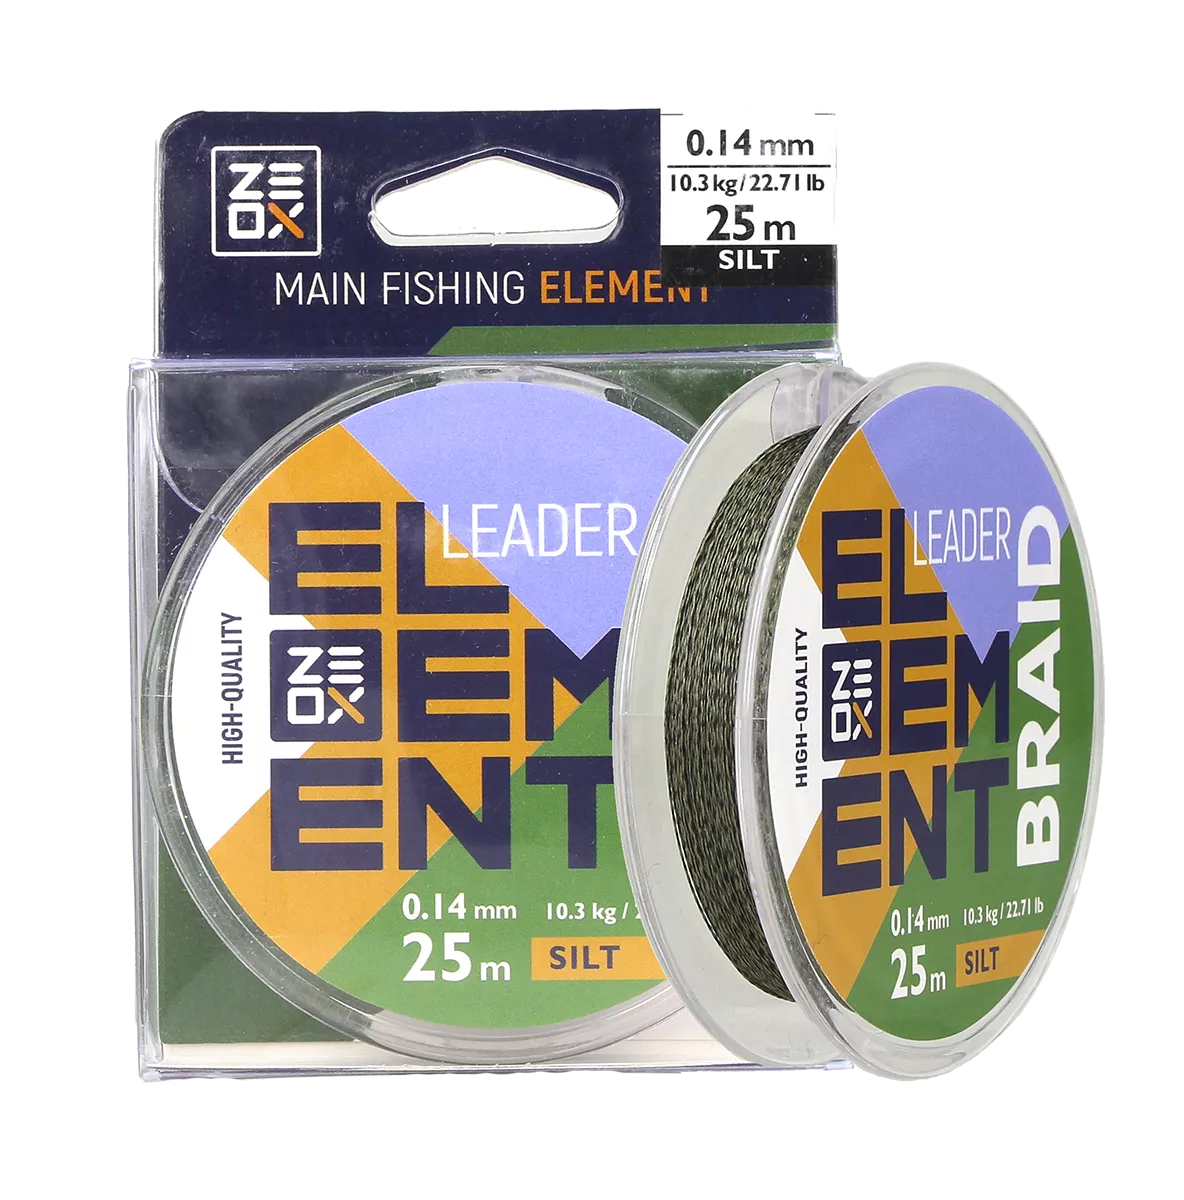 ZEOX Leader Braid Element 25m Silt: check it out on the official